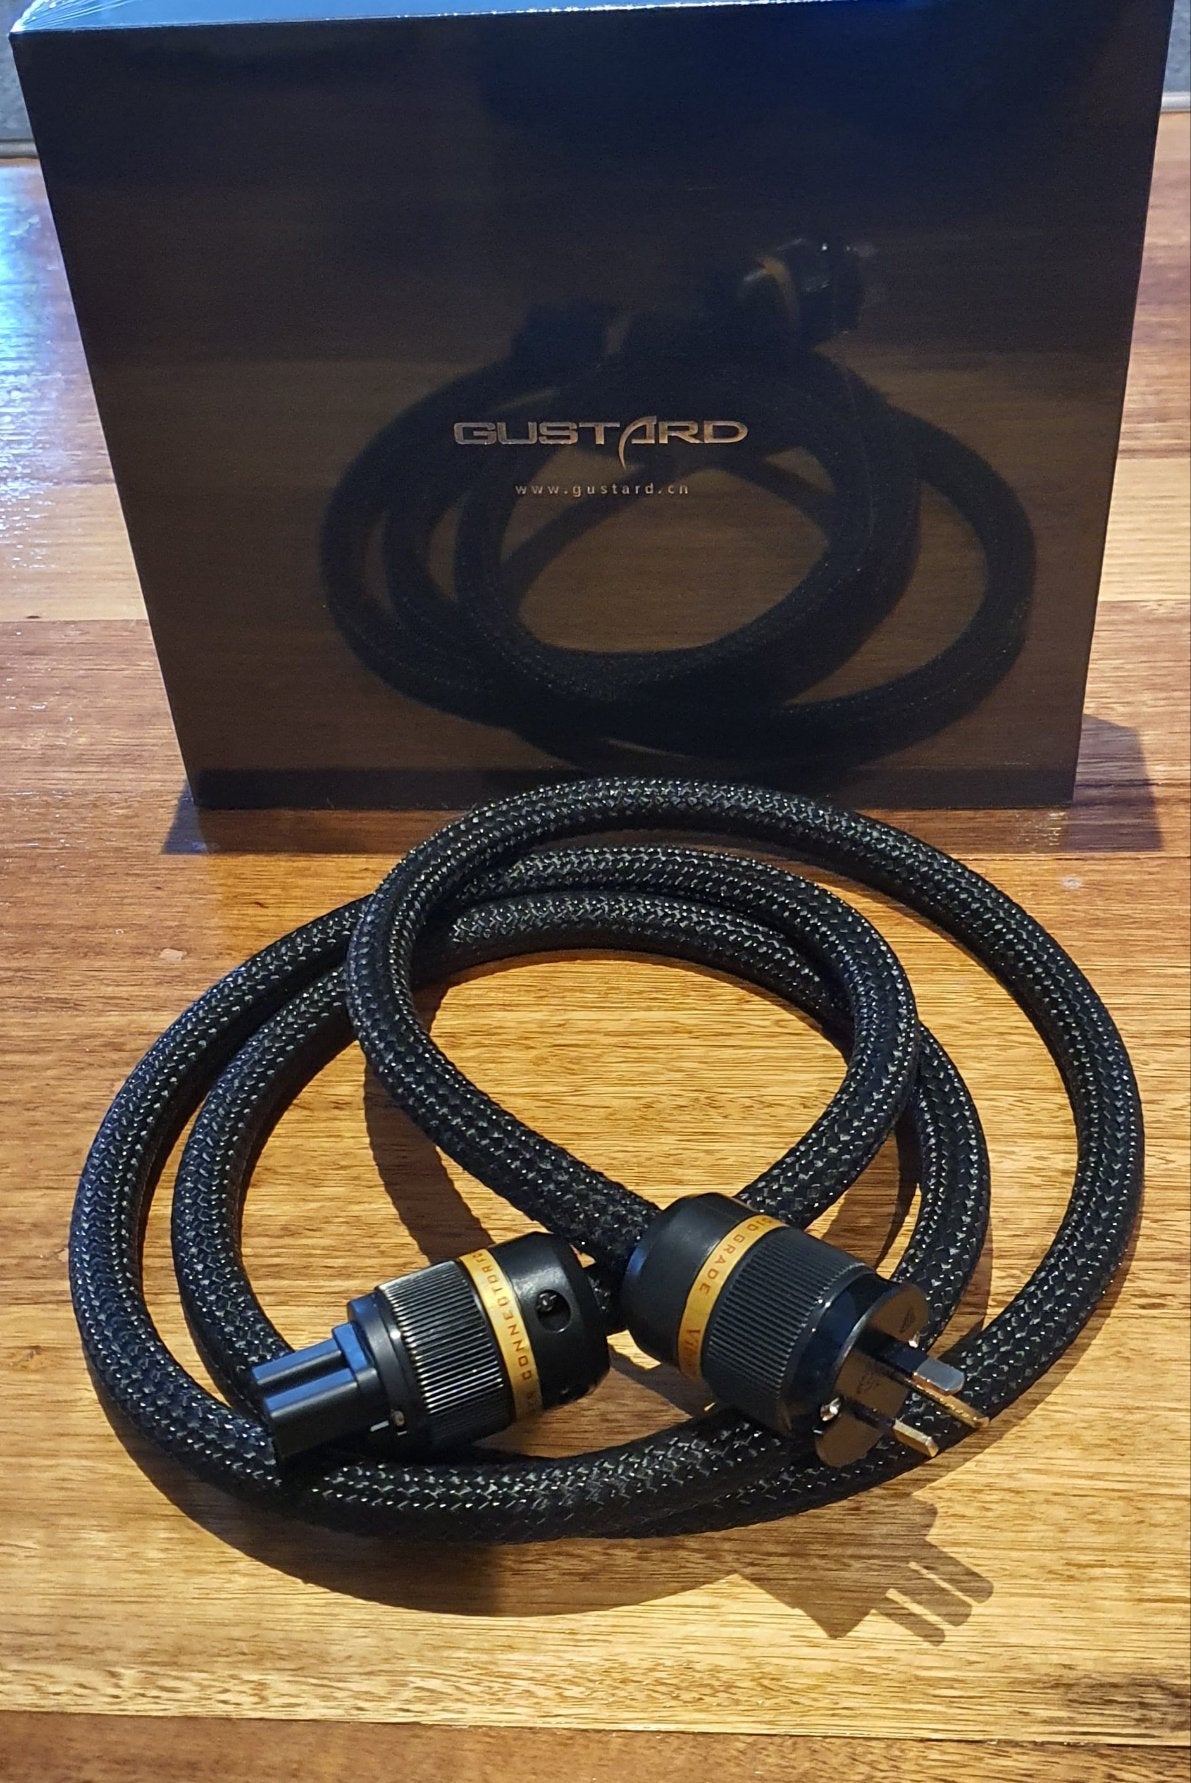 Gustard Audiophile Mains Power Cable